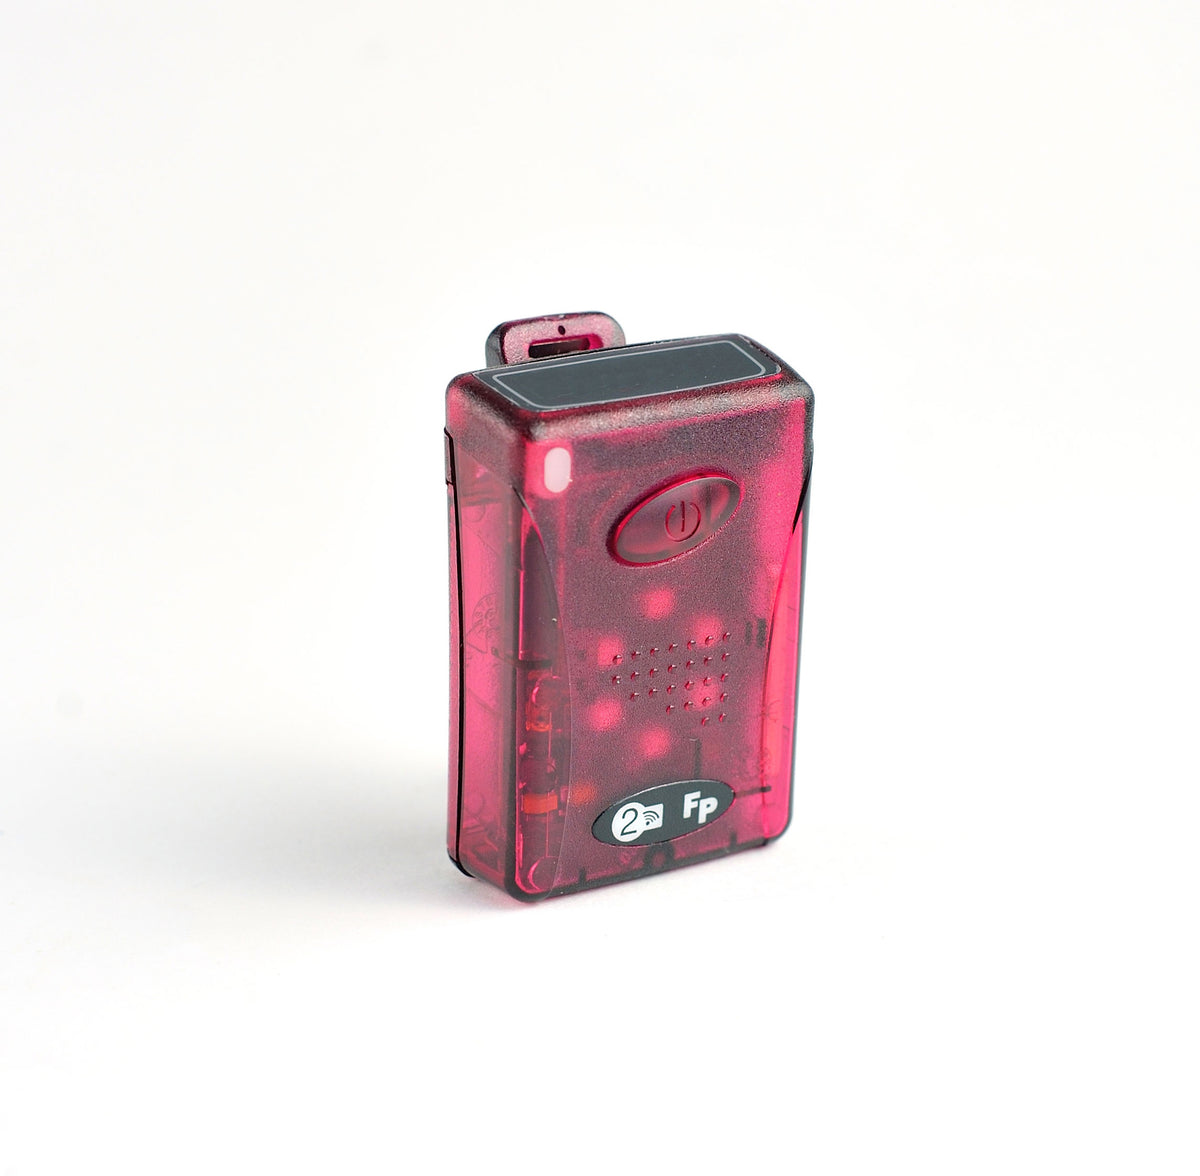 Product photo: Red Bleeper Pager